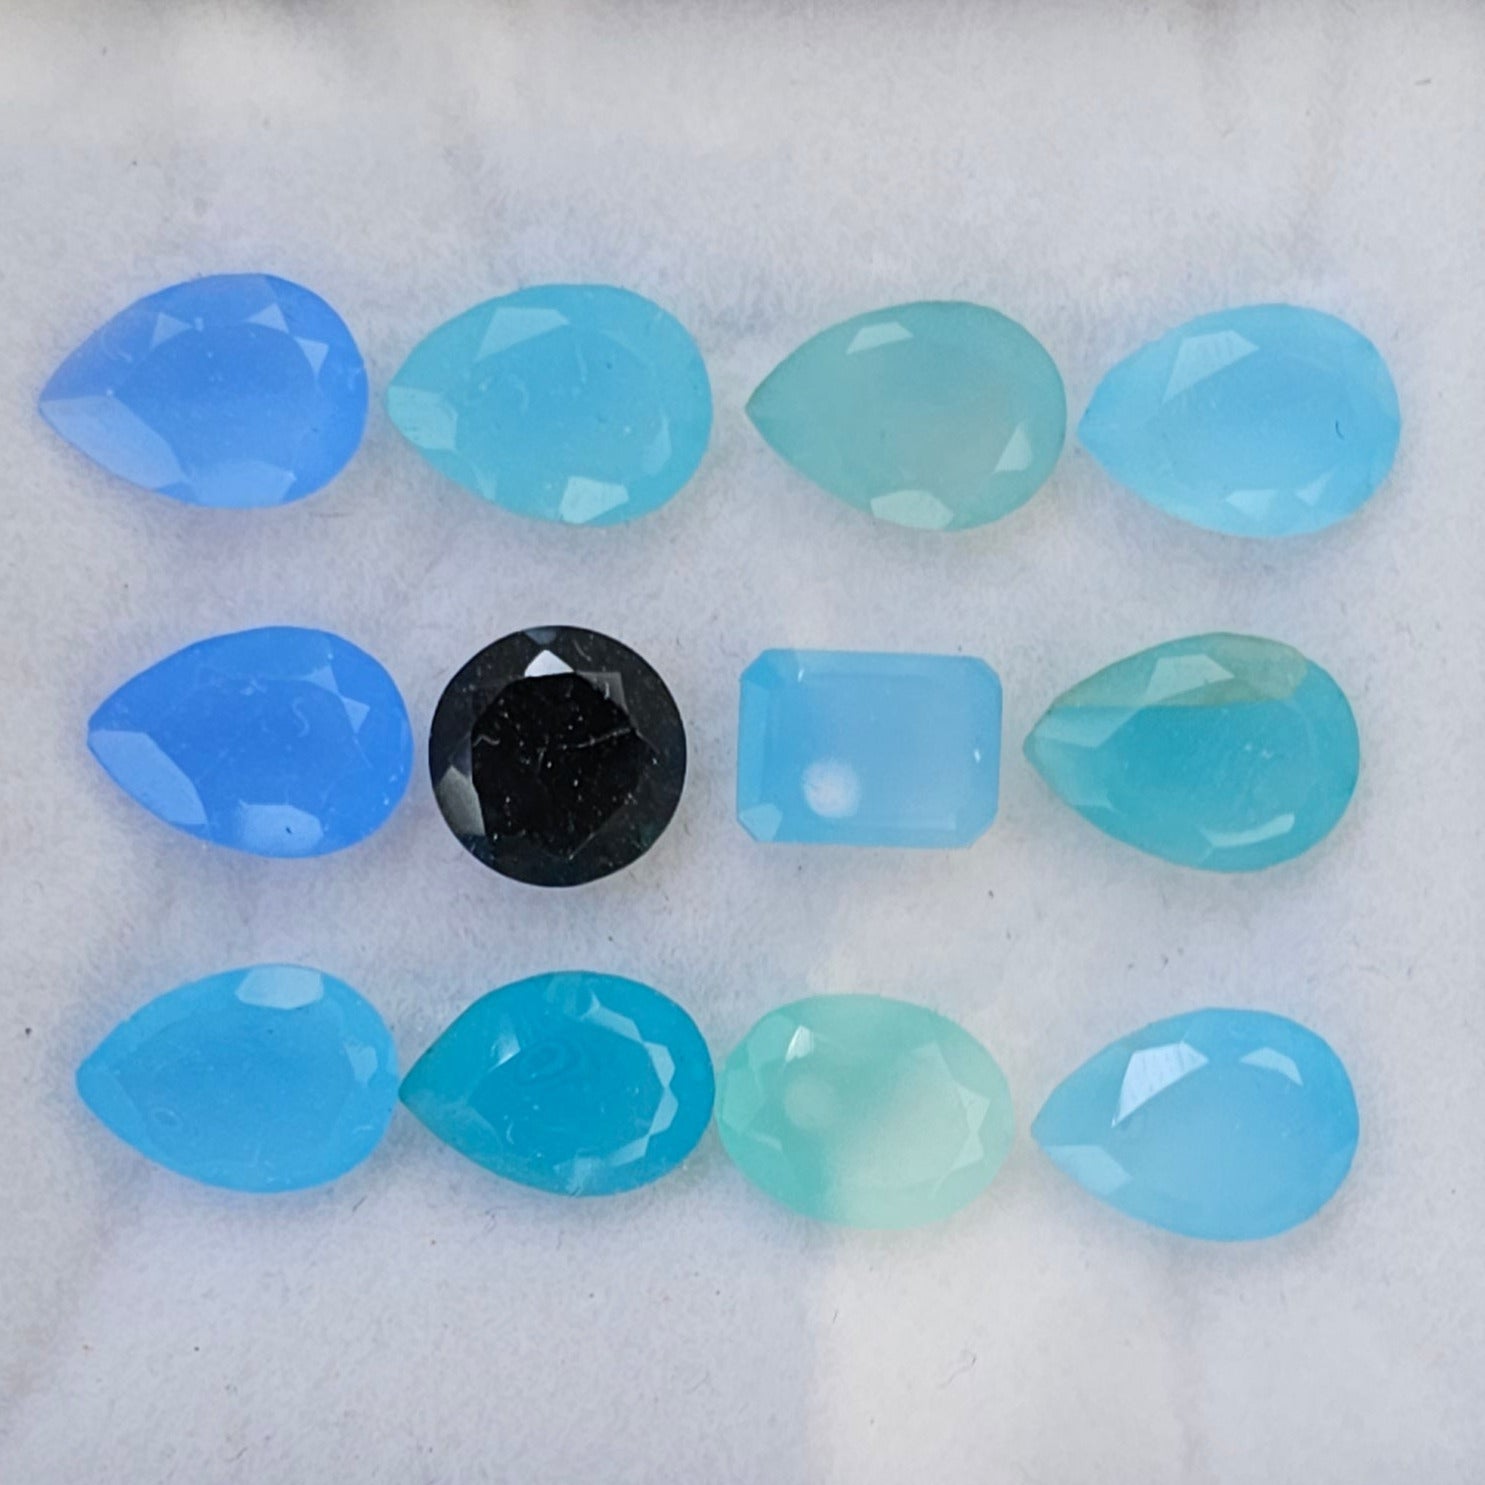 12 Pieces Natural Chalcedony Faceted Gemstone Mix Shape I Size: 8-10mm - The LabradoriteKing